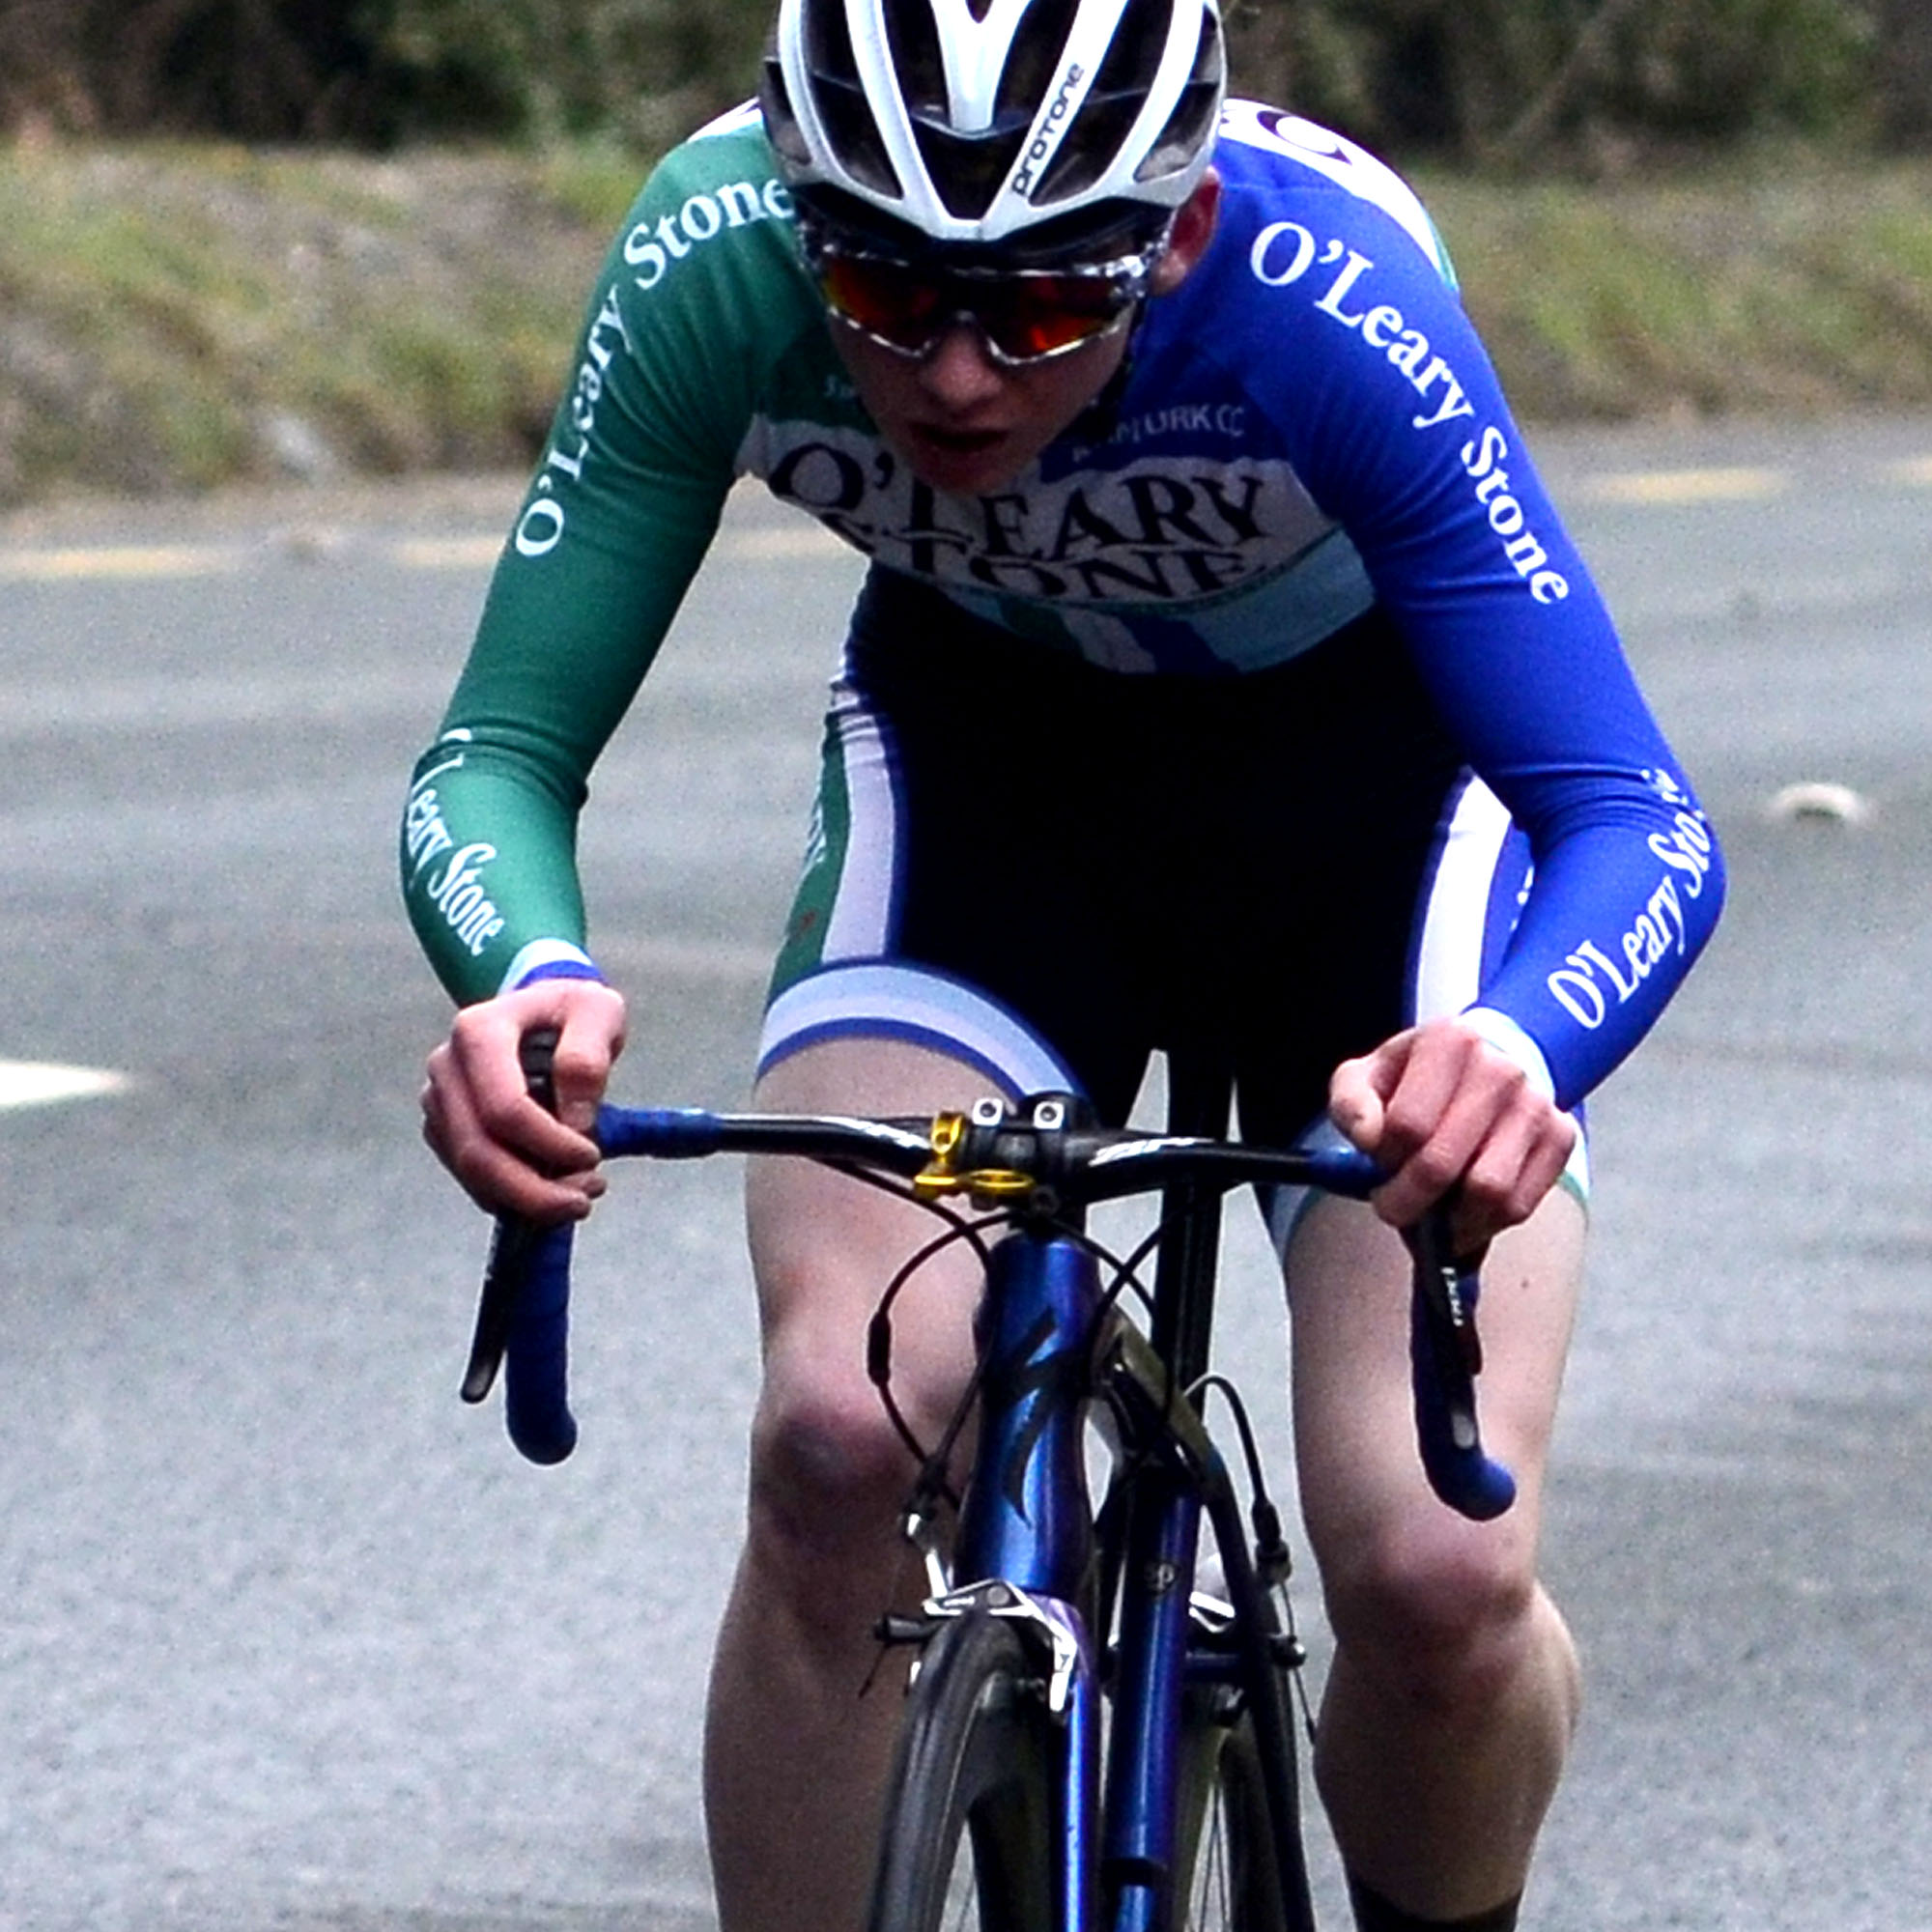 Tom O'Connor - Gorey Three Day Cycle Race 2018